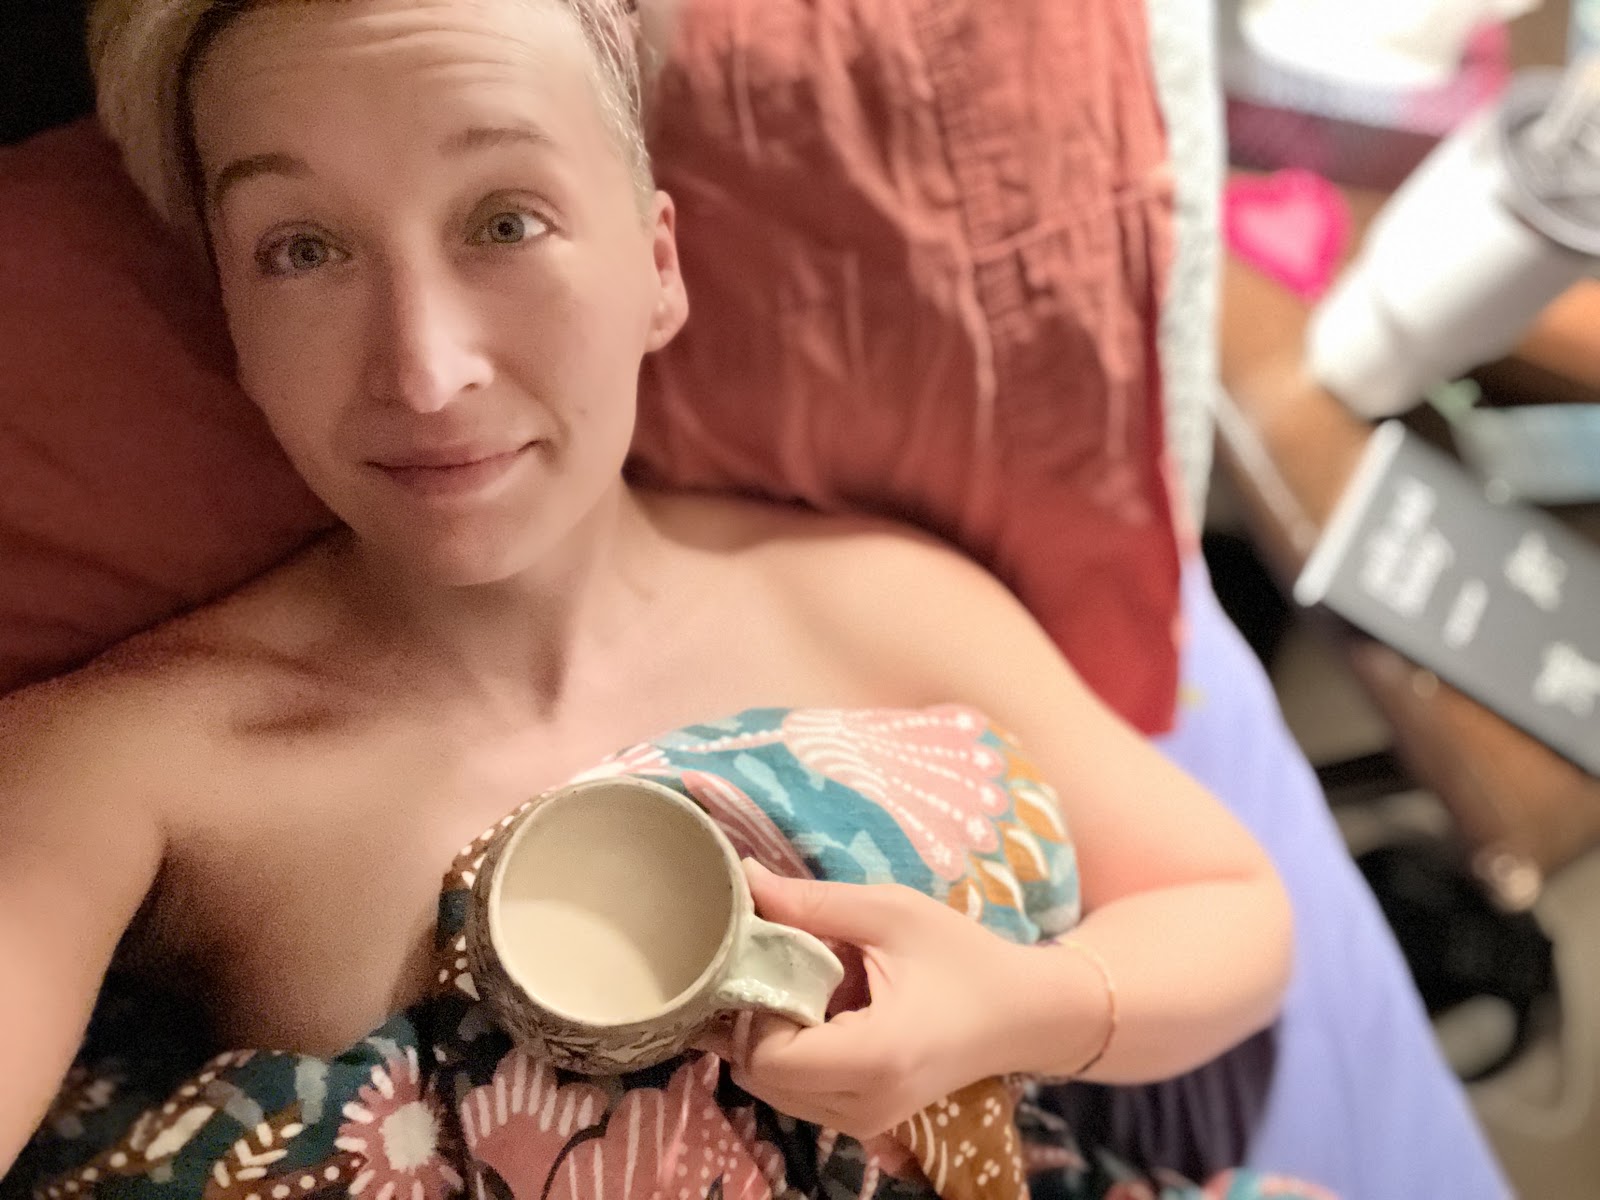 Tarzan lies naked in bed with a coffee cup in hand, her head resting on a peach pilllow case, covered to the shoulders colourful plant-themed anthropologie duvet cover (no nudity in this one - your screen reader isn't holding back, promise)